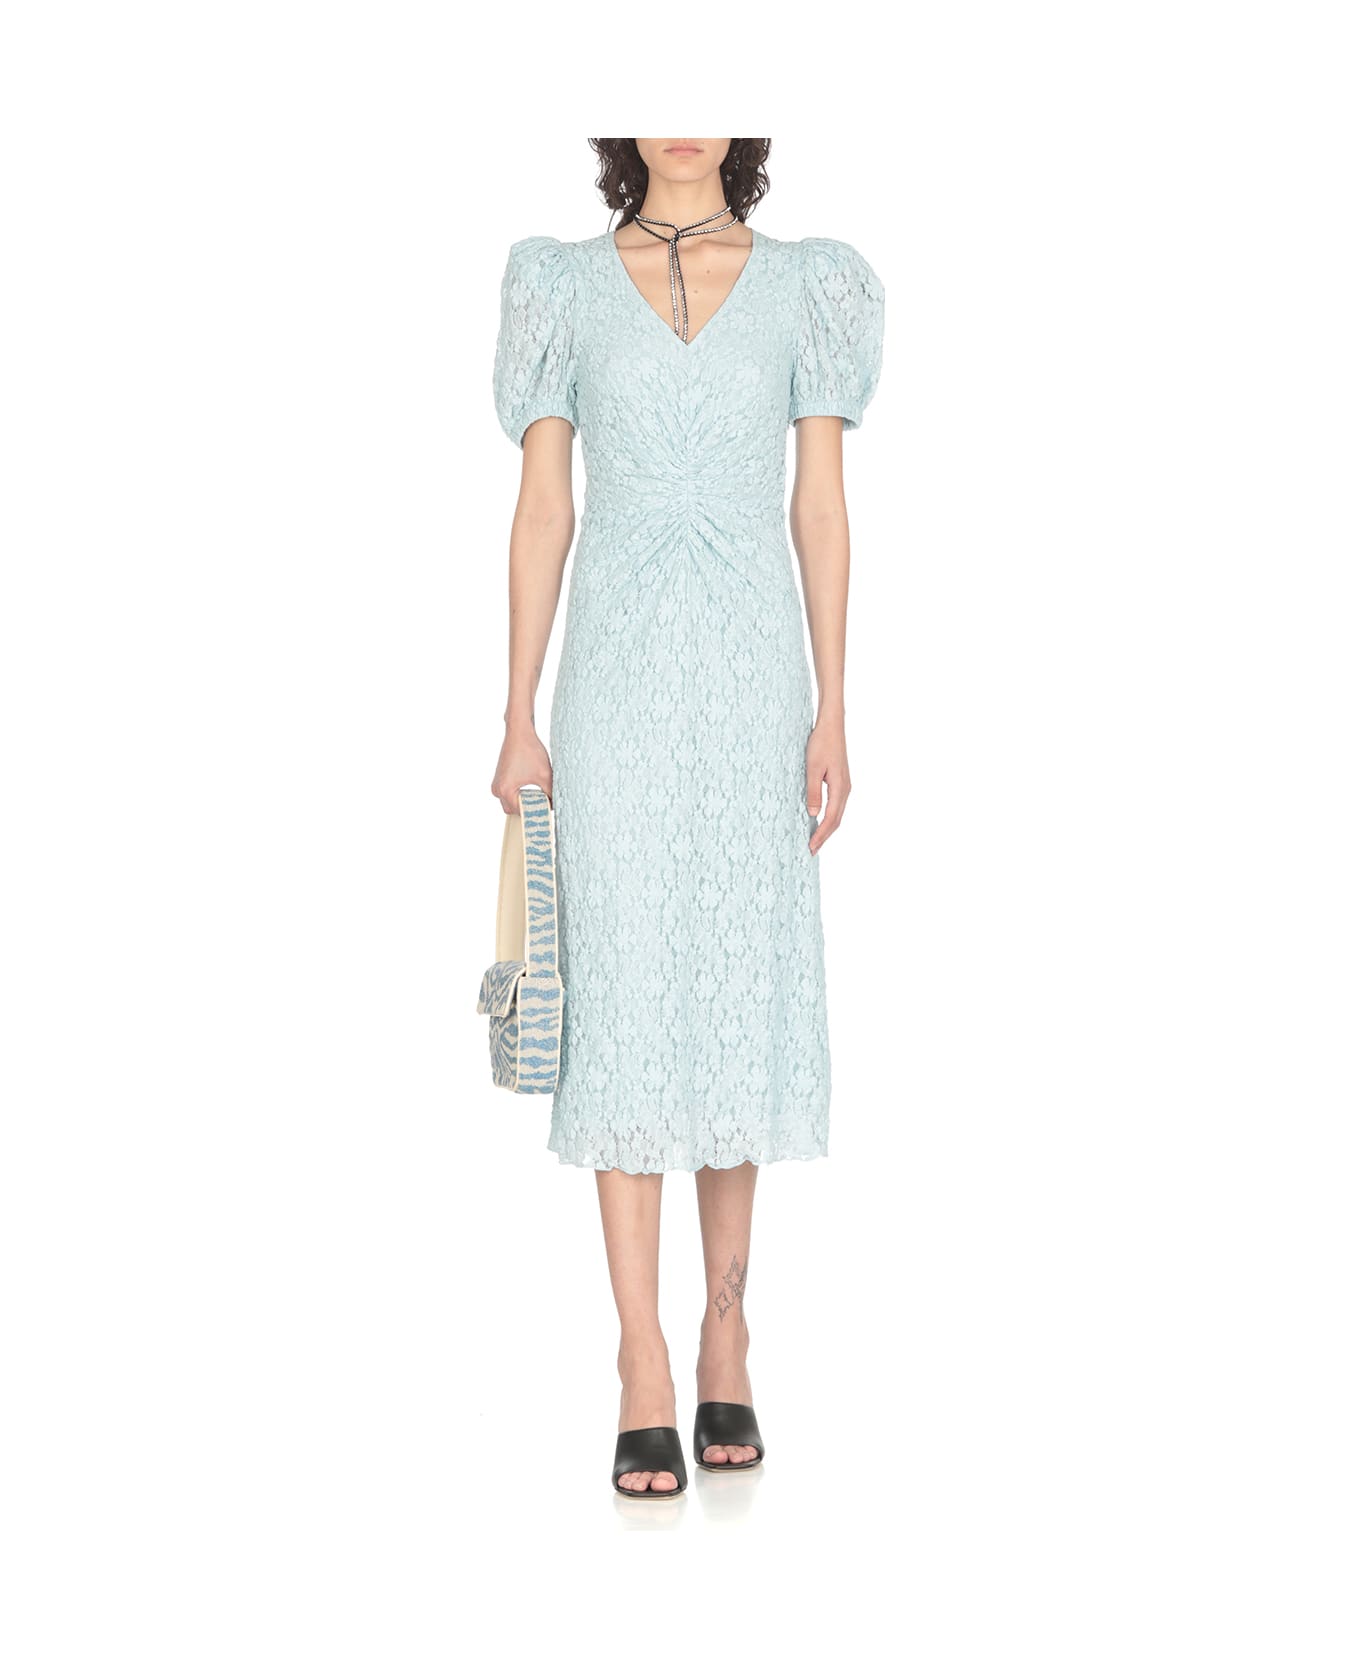 Rotate by Birger Christensen Dress With Embroideries - Light Blue